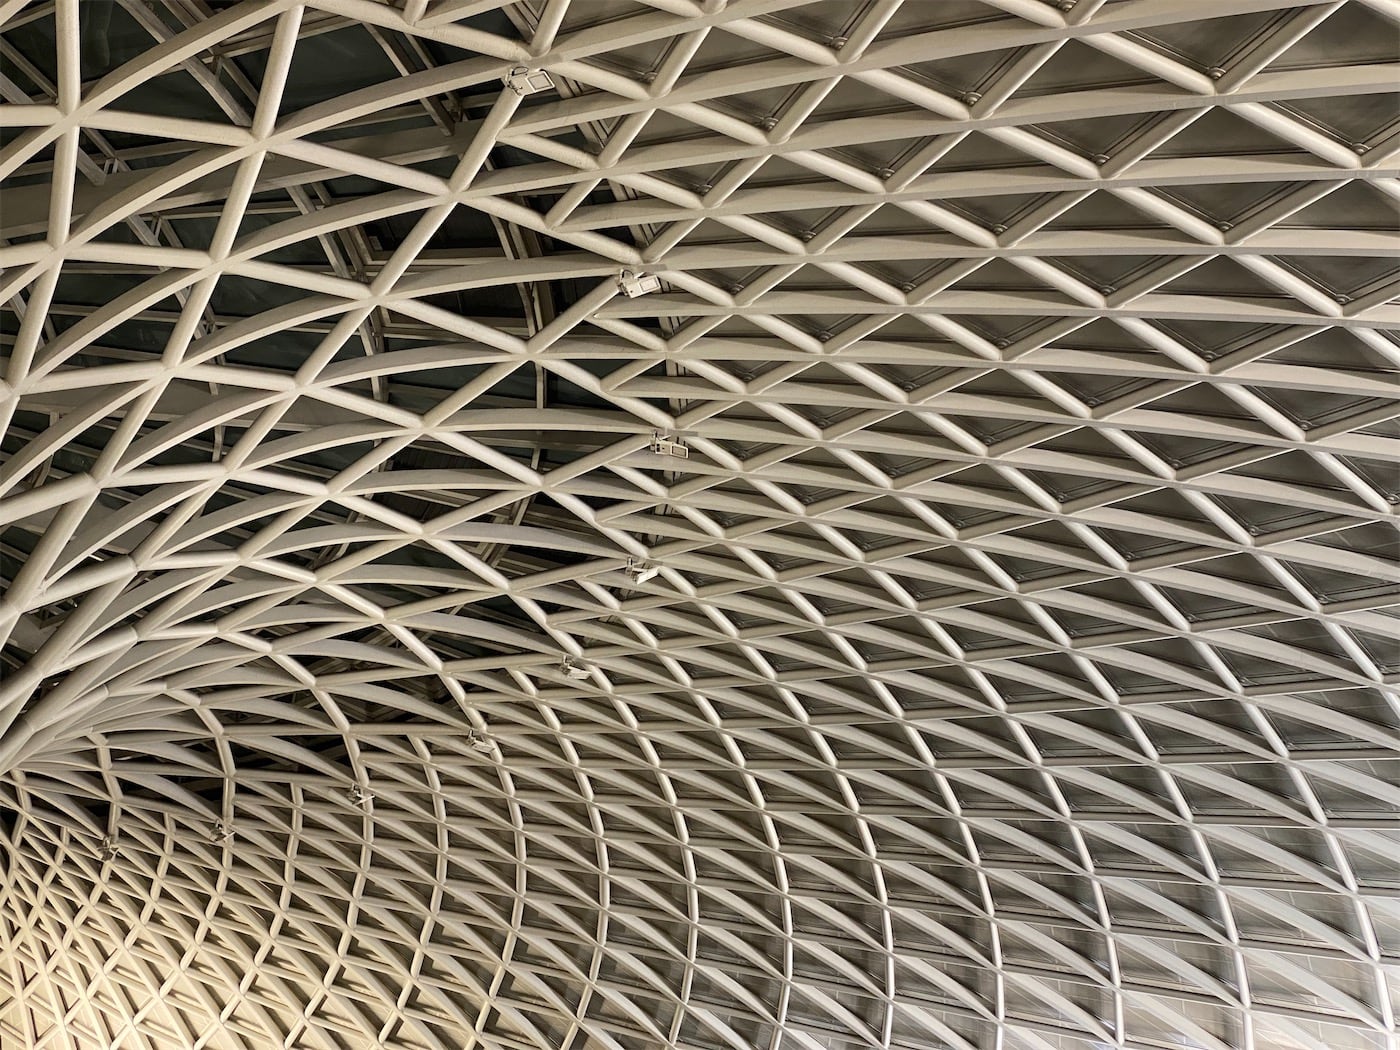 I’m always impressed by the roof at Kings Cross